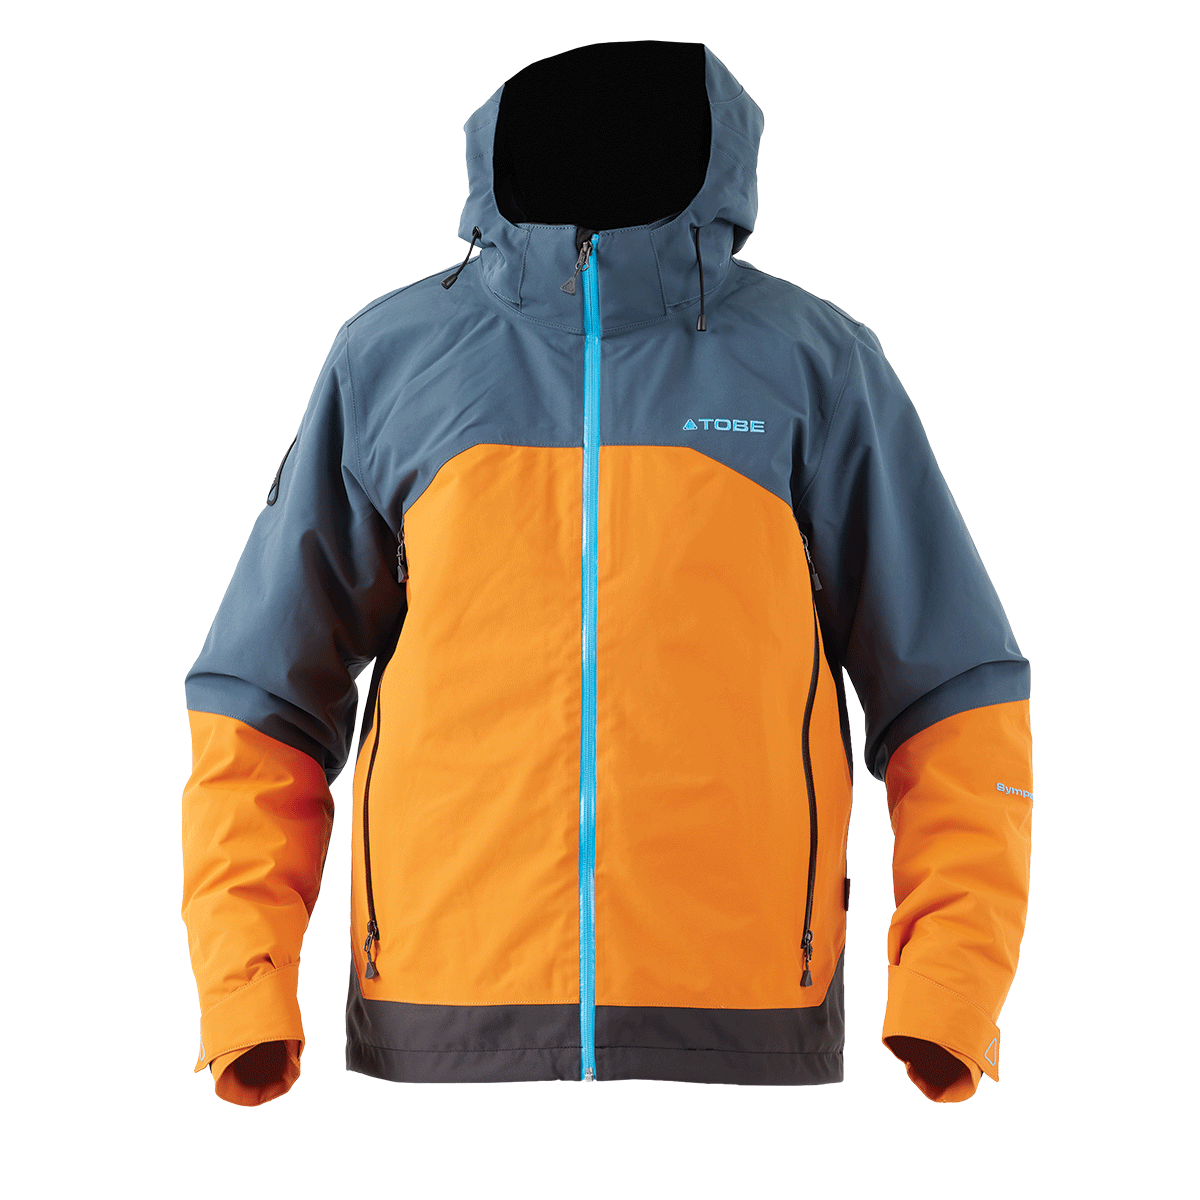 tobe insulated jackets for men scope